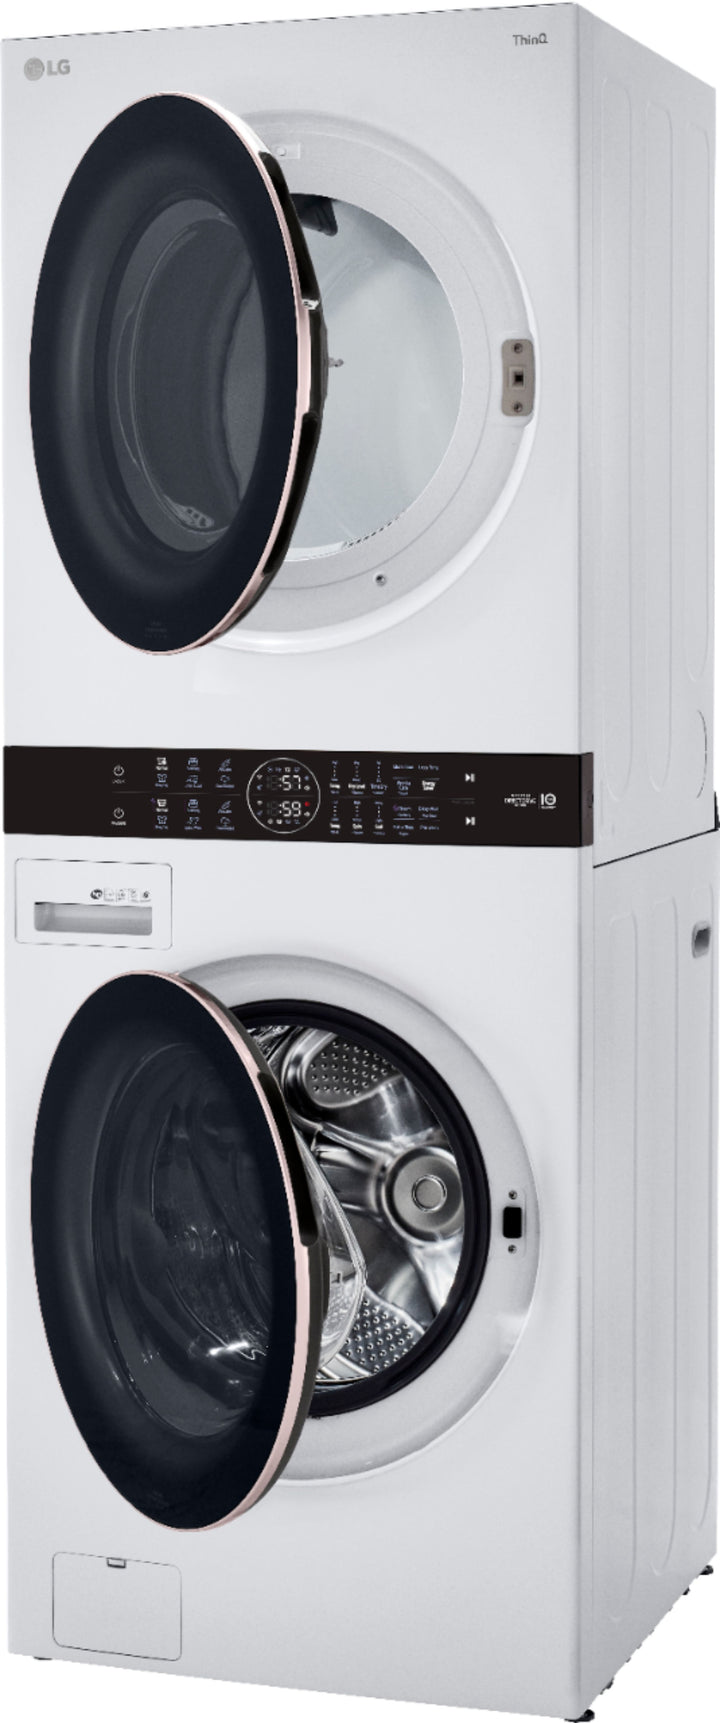 LG - 4.5 Cu. Ft. HE Smart Front Load Washer and 7.4 Cu. Ft. Electric Dryer WashTower with Built-In Intelligence - White_5